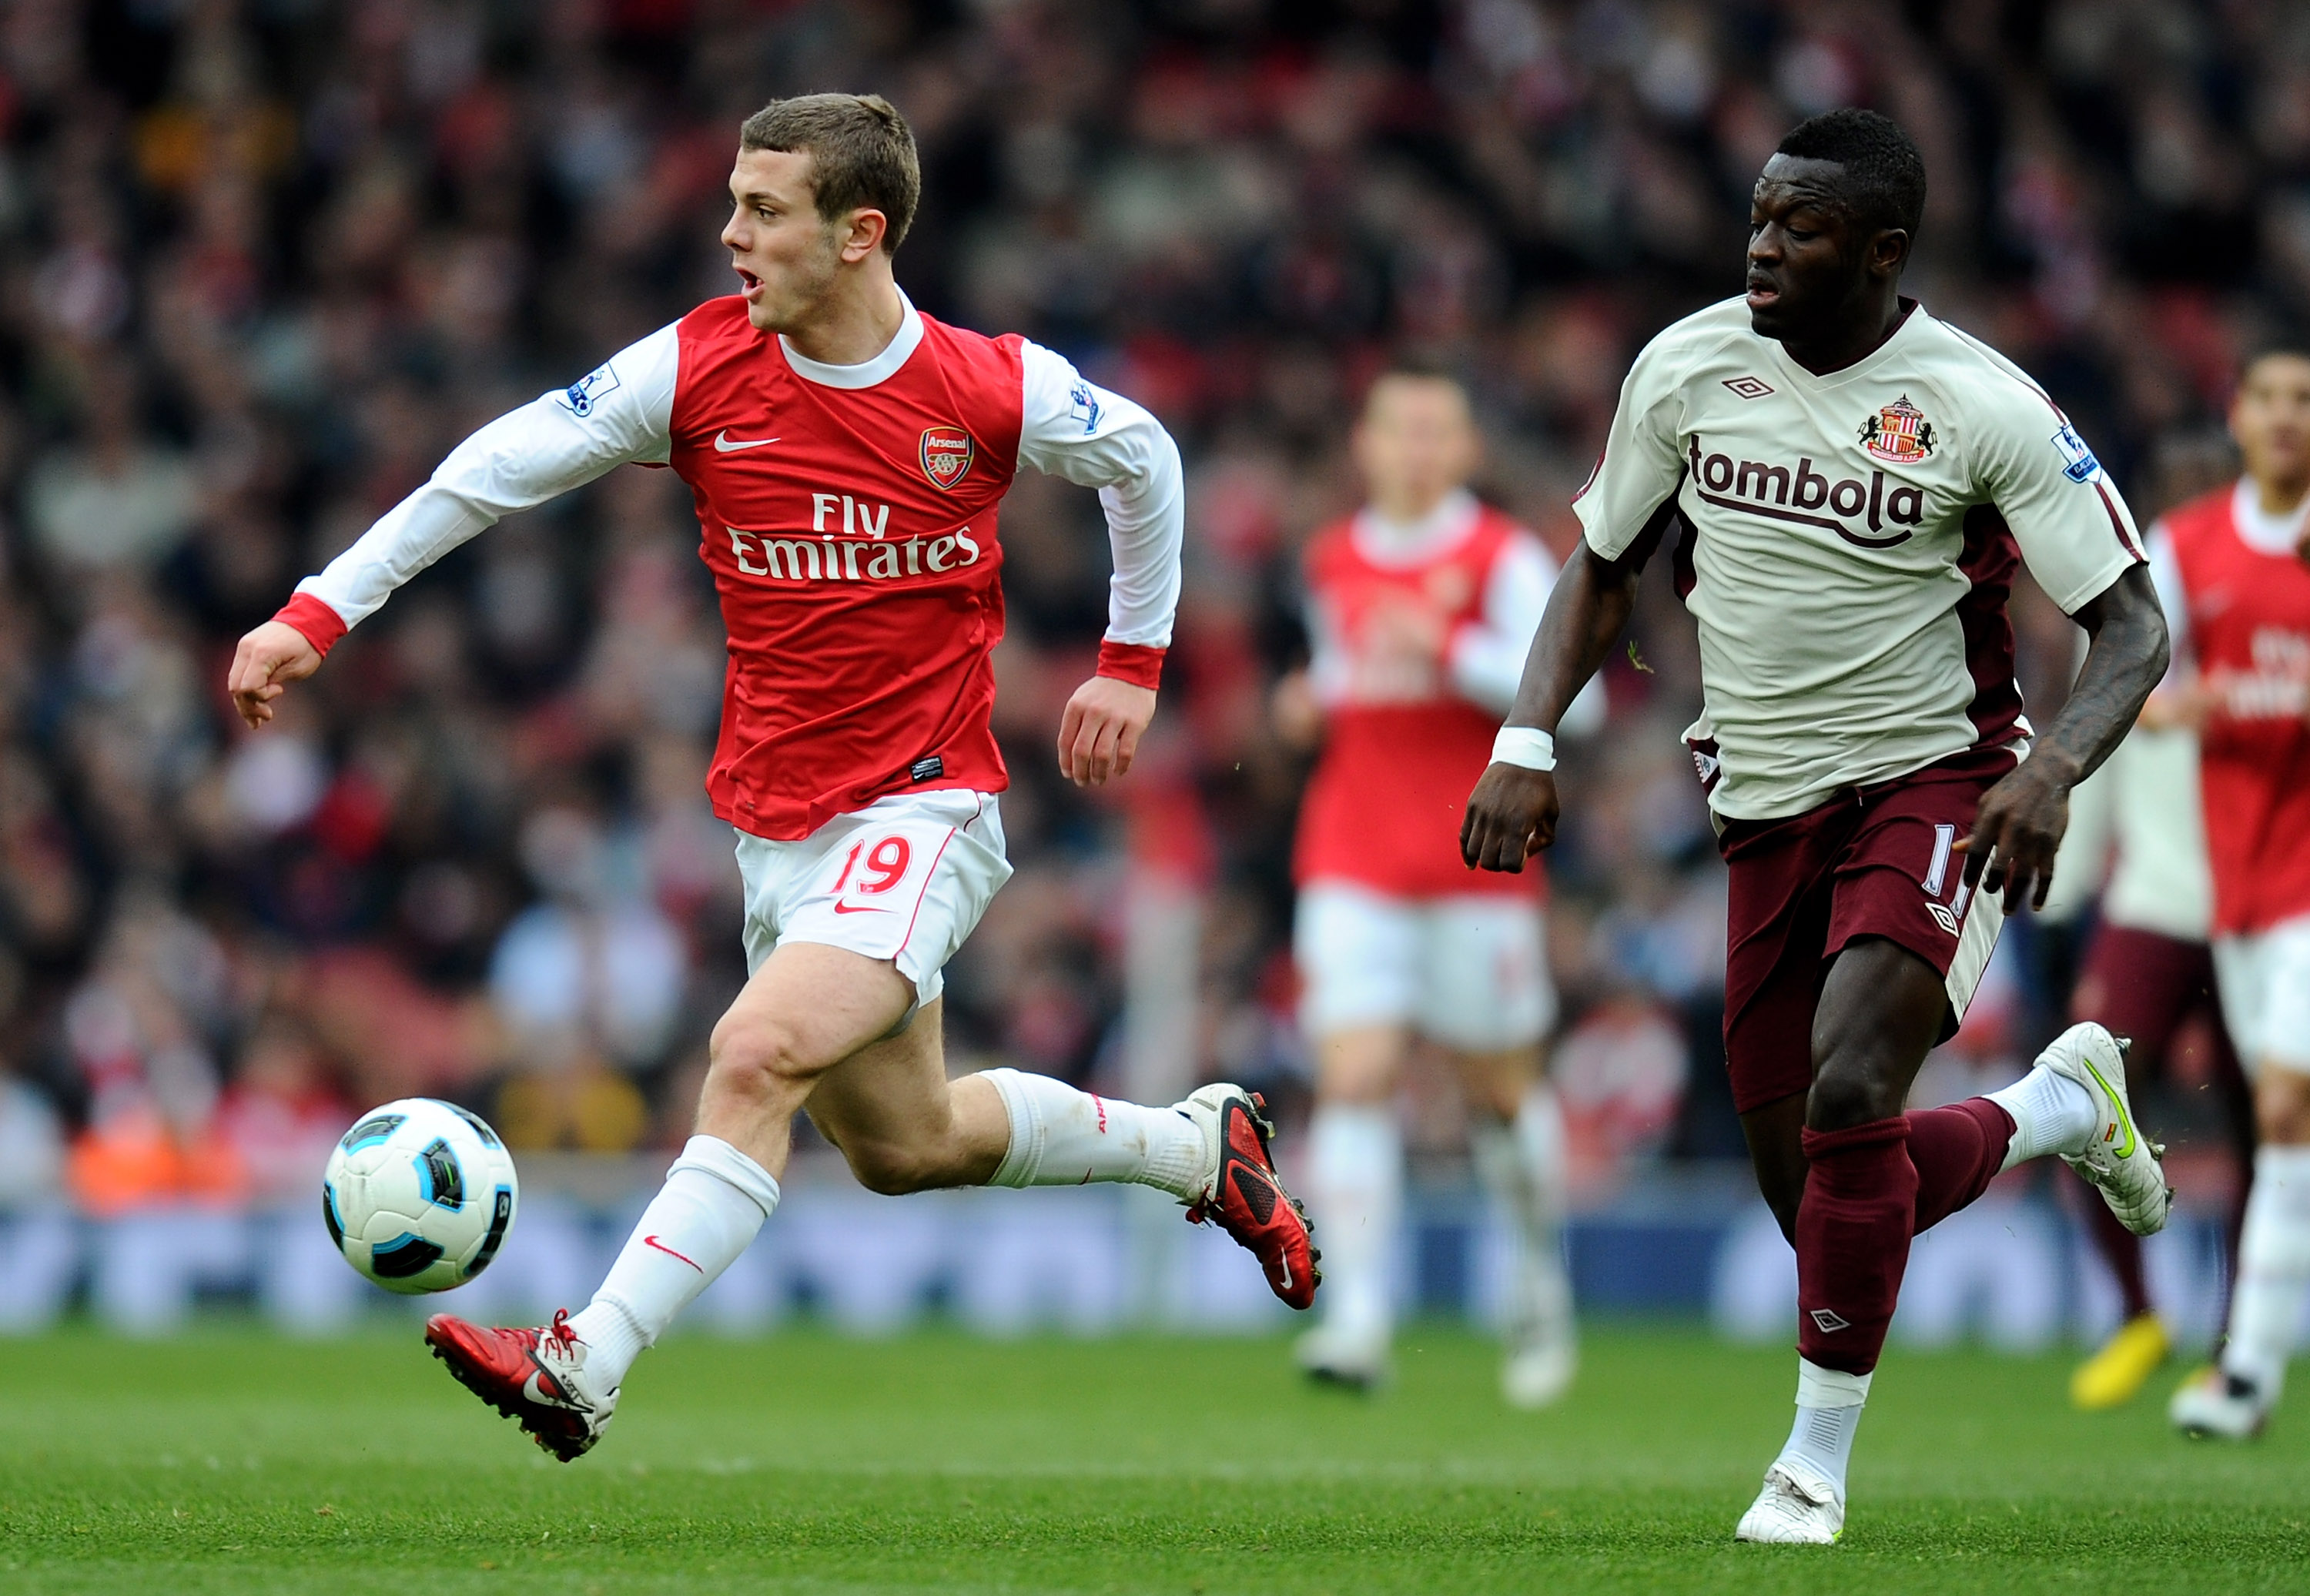 LONDON, ENGLAND - MARCH 05:   Jack Wilshere of Arsenal is pursued by Sulley Muntari of Sunderland during the Barclays Premier League match between Arsenal and Sunderland at Emirates Stadium on March 5, 2011 in London, England.  (Photo by Mike Hewitt/Getty